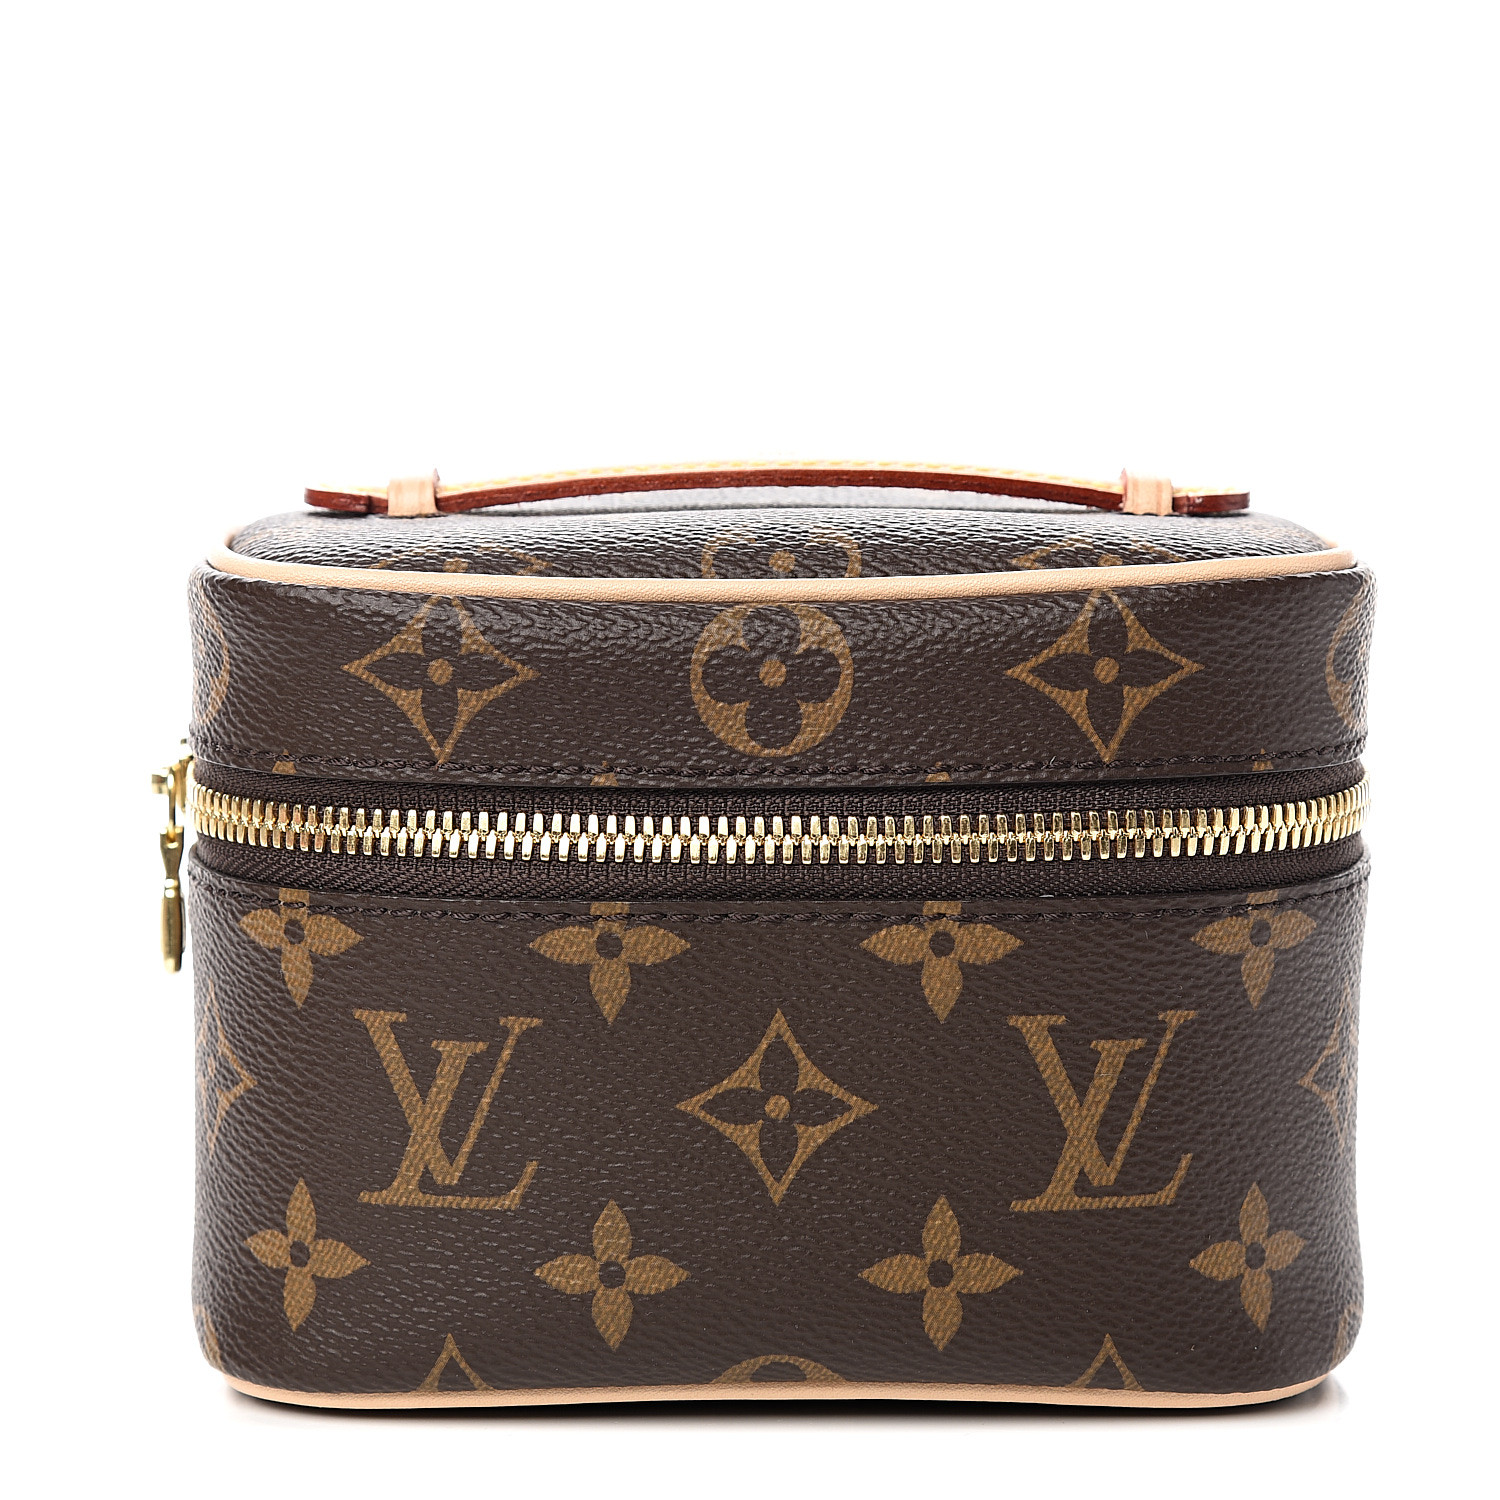 What Do You Mean, Your Whiskey Trunk Isn't Louis Vuitton?